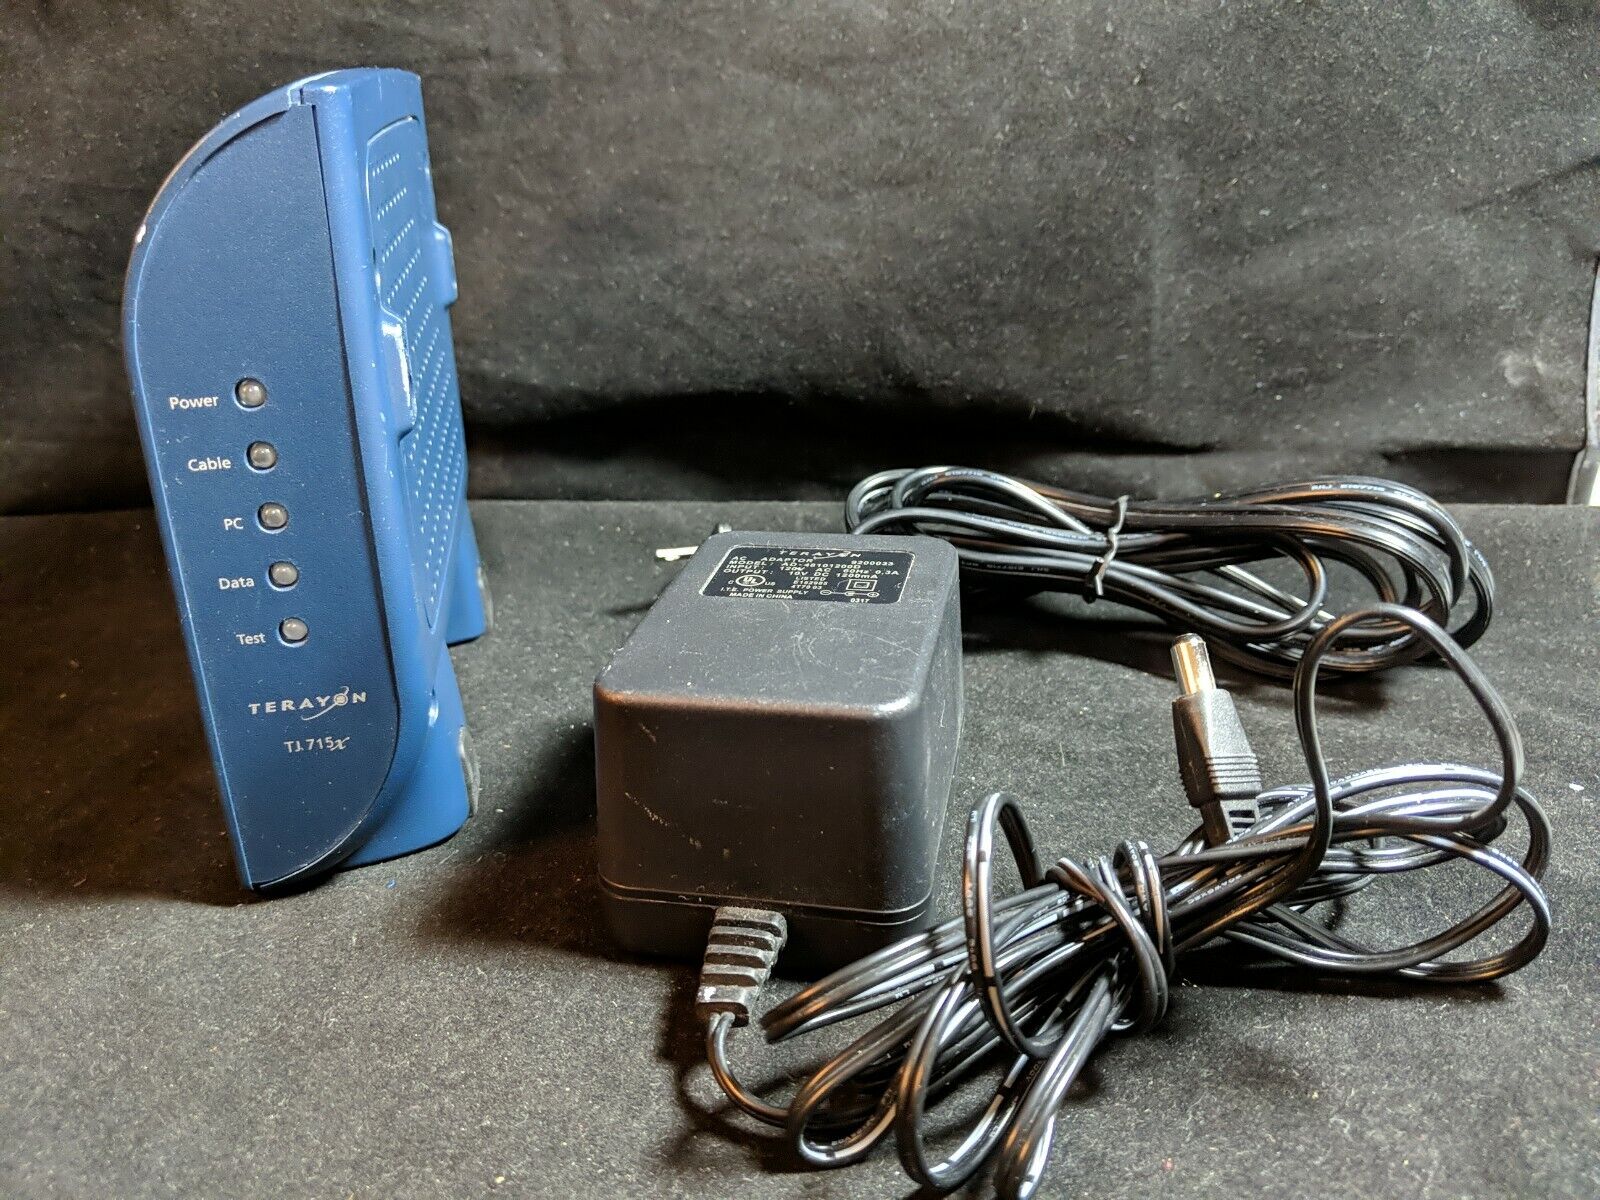 Terayon Model TJ715X Cable Modem with AC Power Adapter